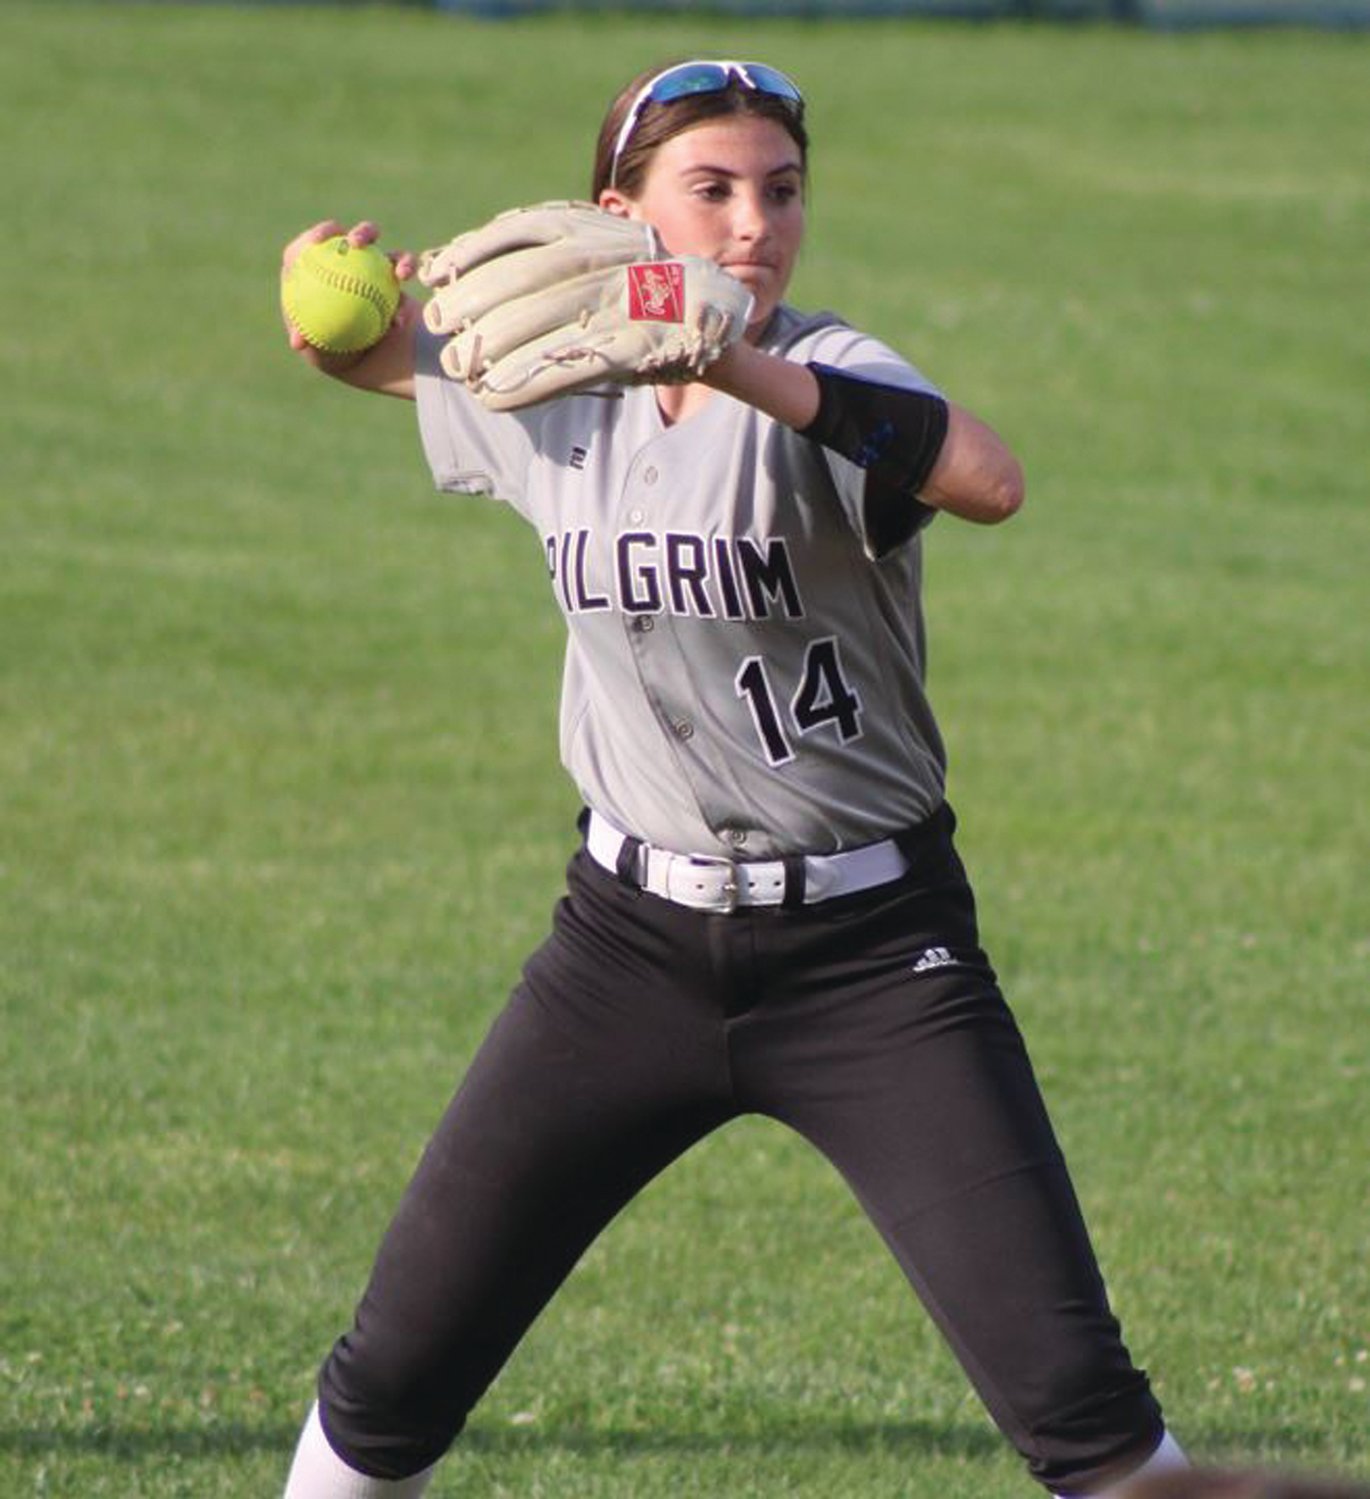 READY FOR A THROW: Paige O’Brien gets ready for a throw. (Warwick Beacon photo)